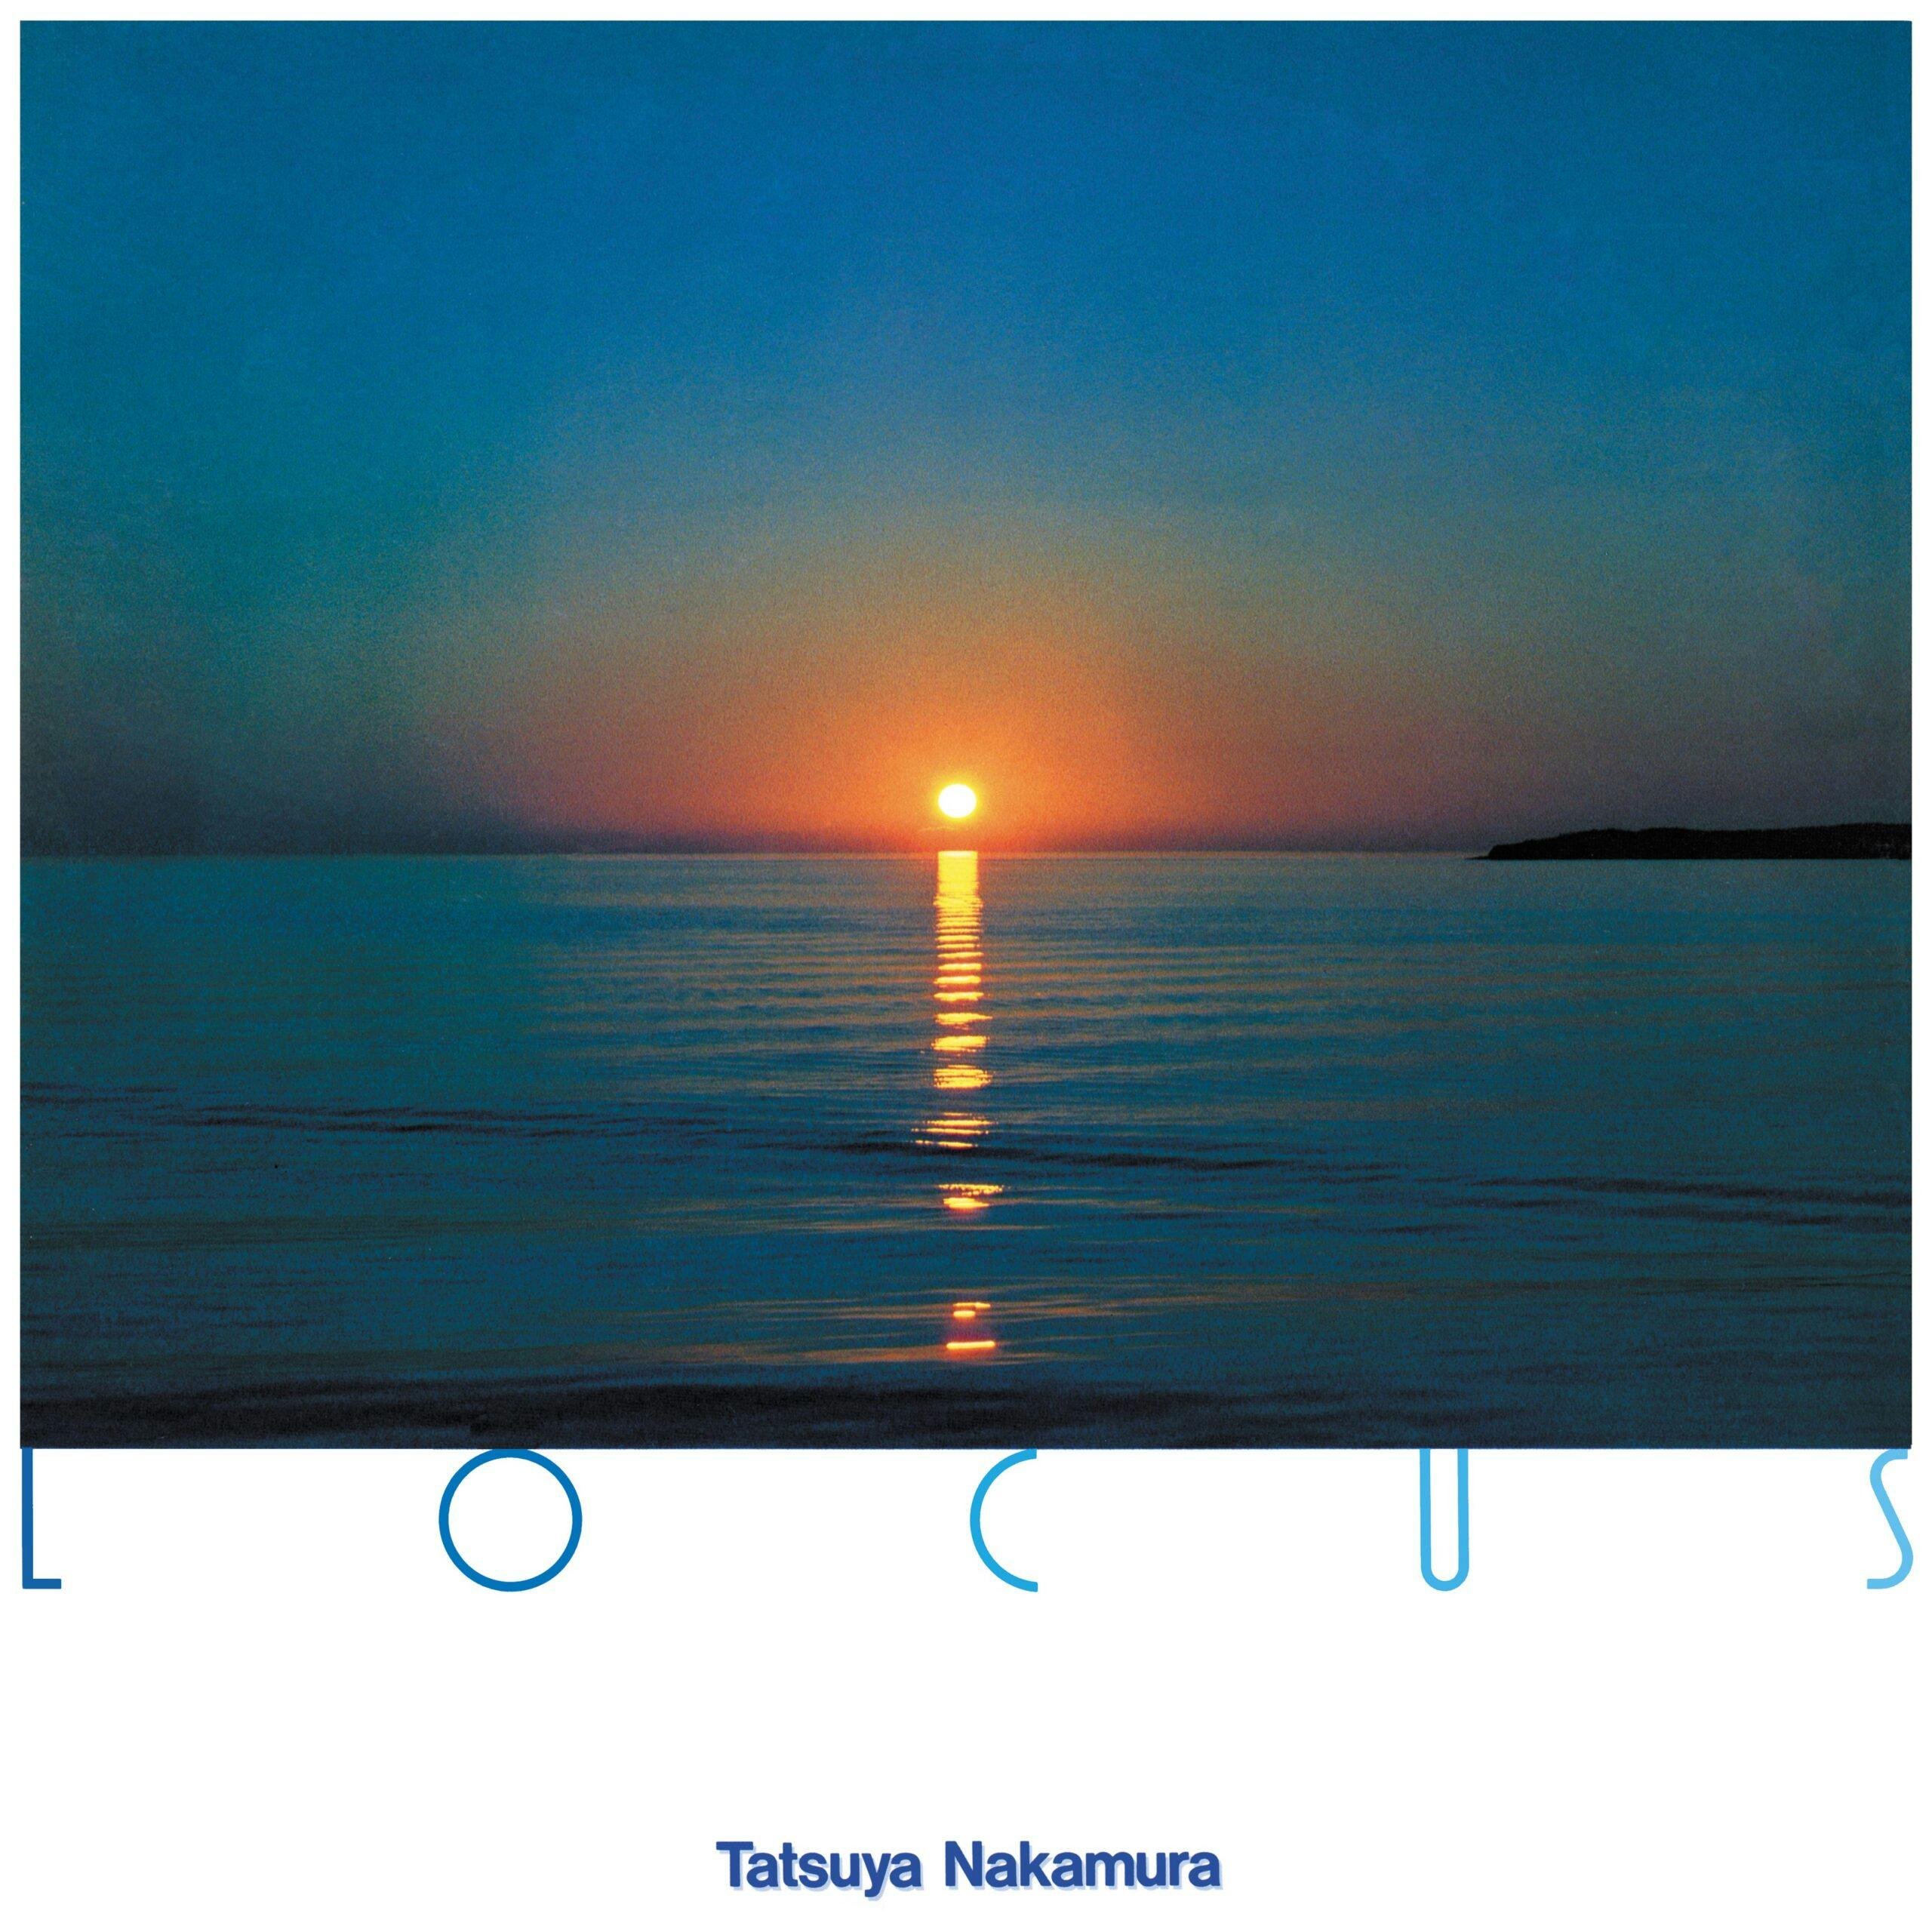 Japan has produced some exceptionally talented jazz drummers and among them is Tatsuya Nakamura, who joins the BBE Music J Jazz Masterclass Series with his album ‘Locus’ from 1984, a session covering several bases, from heavy percussive samba to meditative avant-ambient. This is the album’s first ever reissue, although a track from ‘Locus’, ‘1⁄4 Samba’, was included on J Jazz vol. 3.